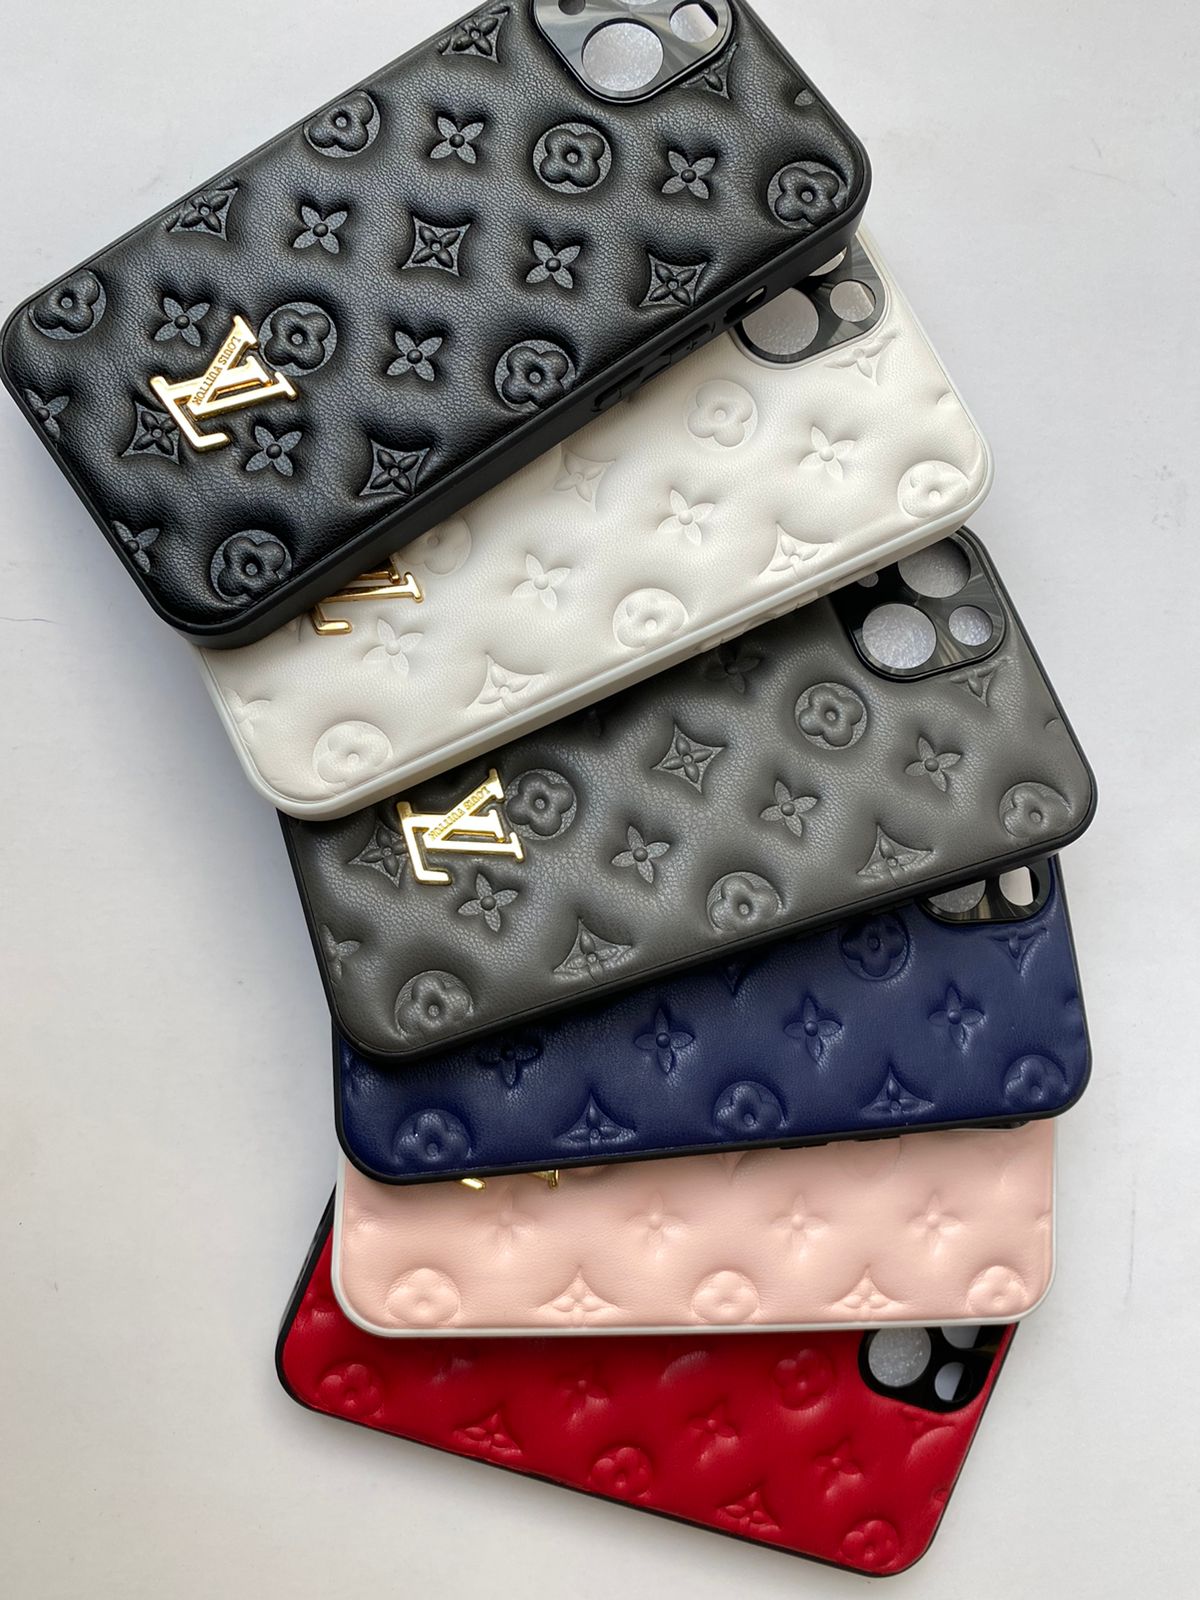 LOUIS VUITTON PATTERN GRAY iPhone 12 Pro Max Case Cover